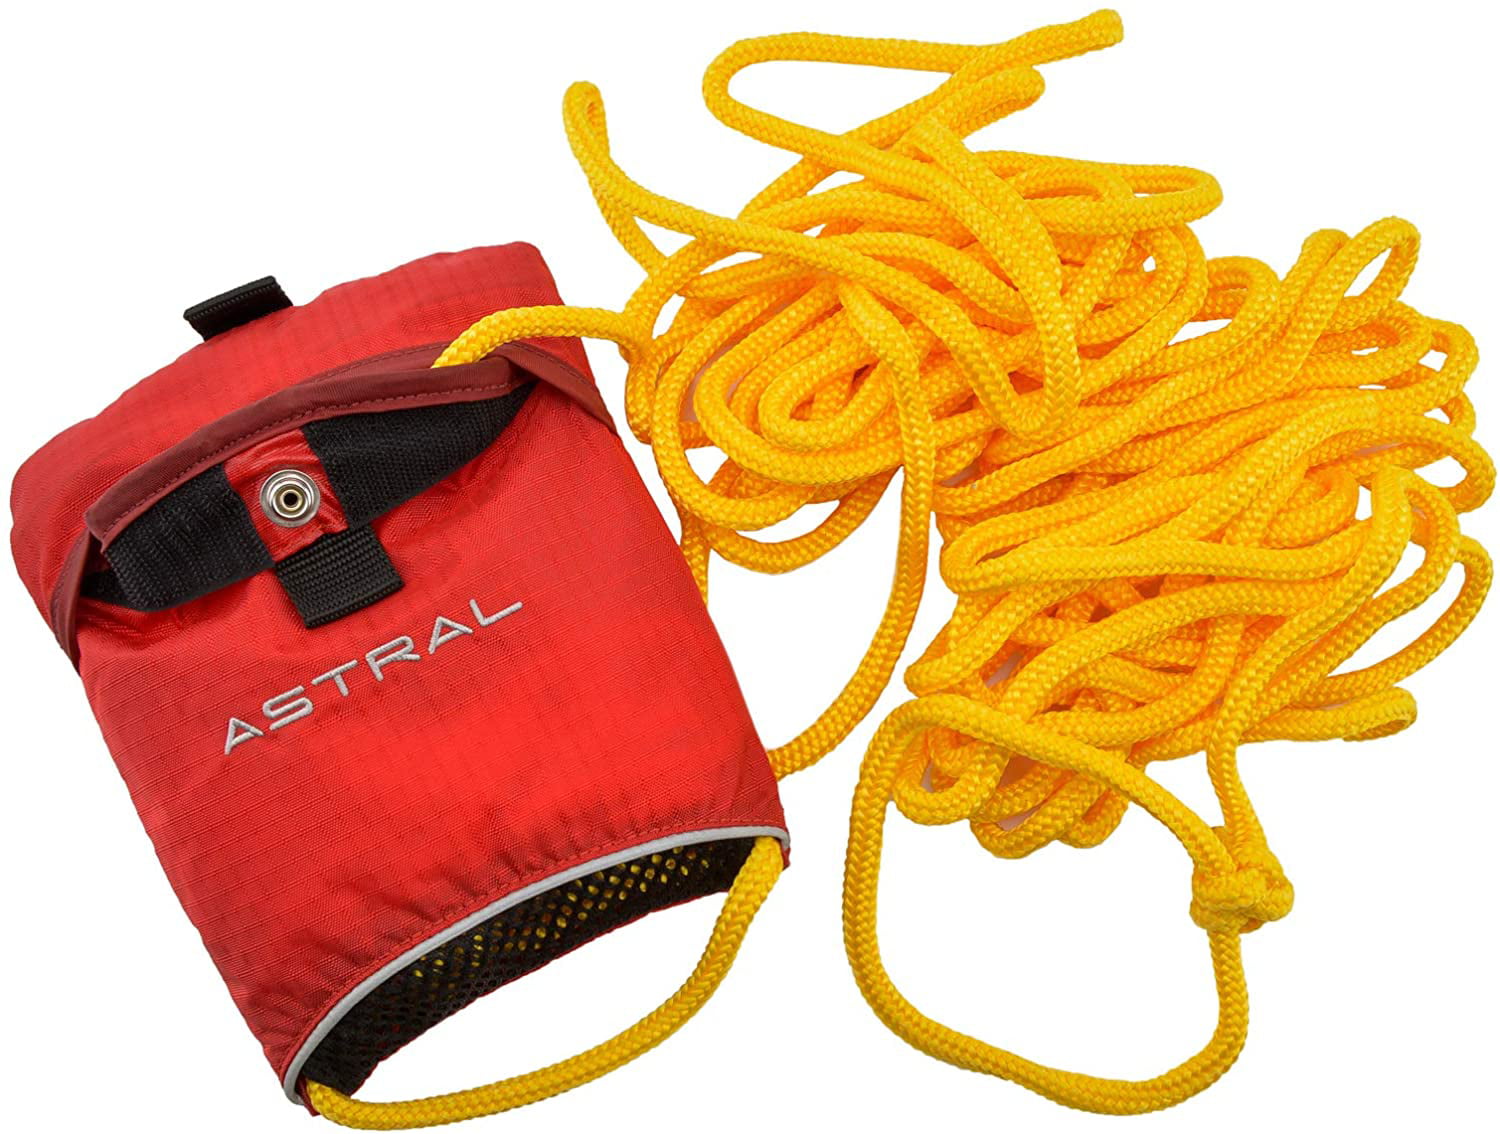 Rescue Throw Rope Bag 